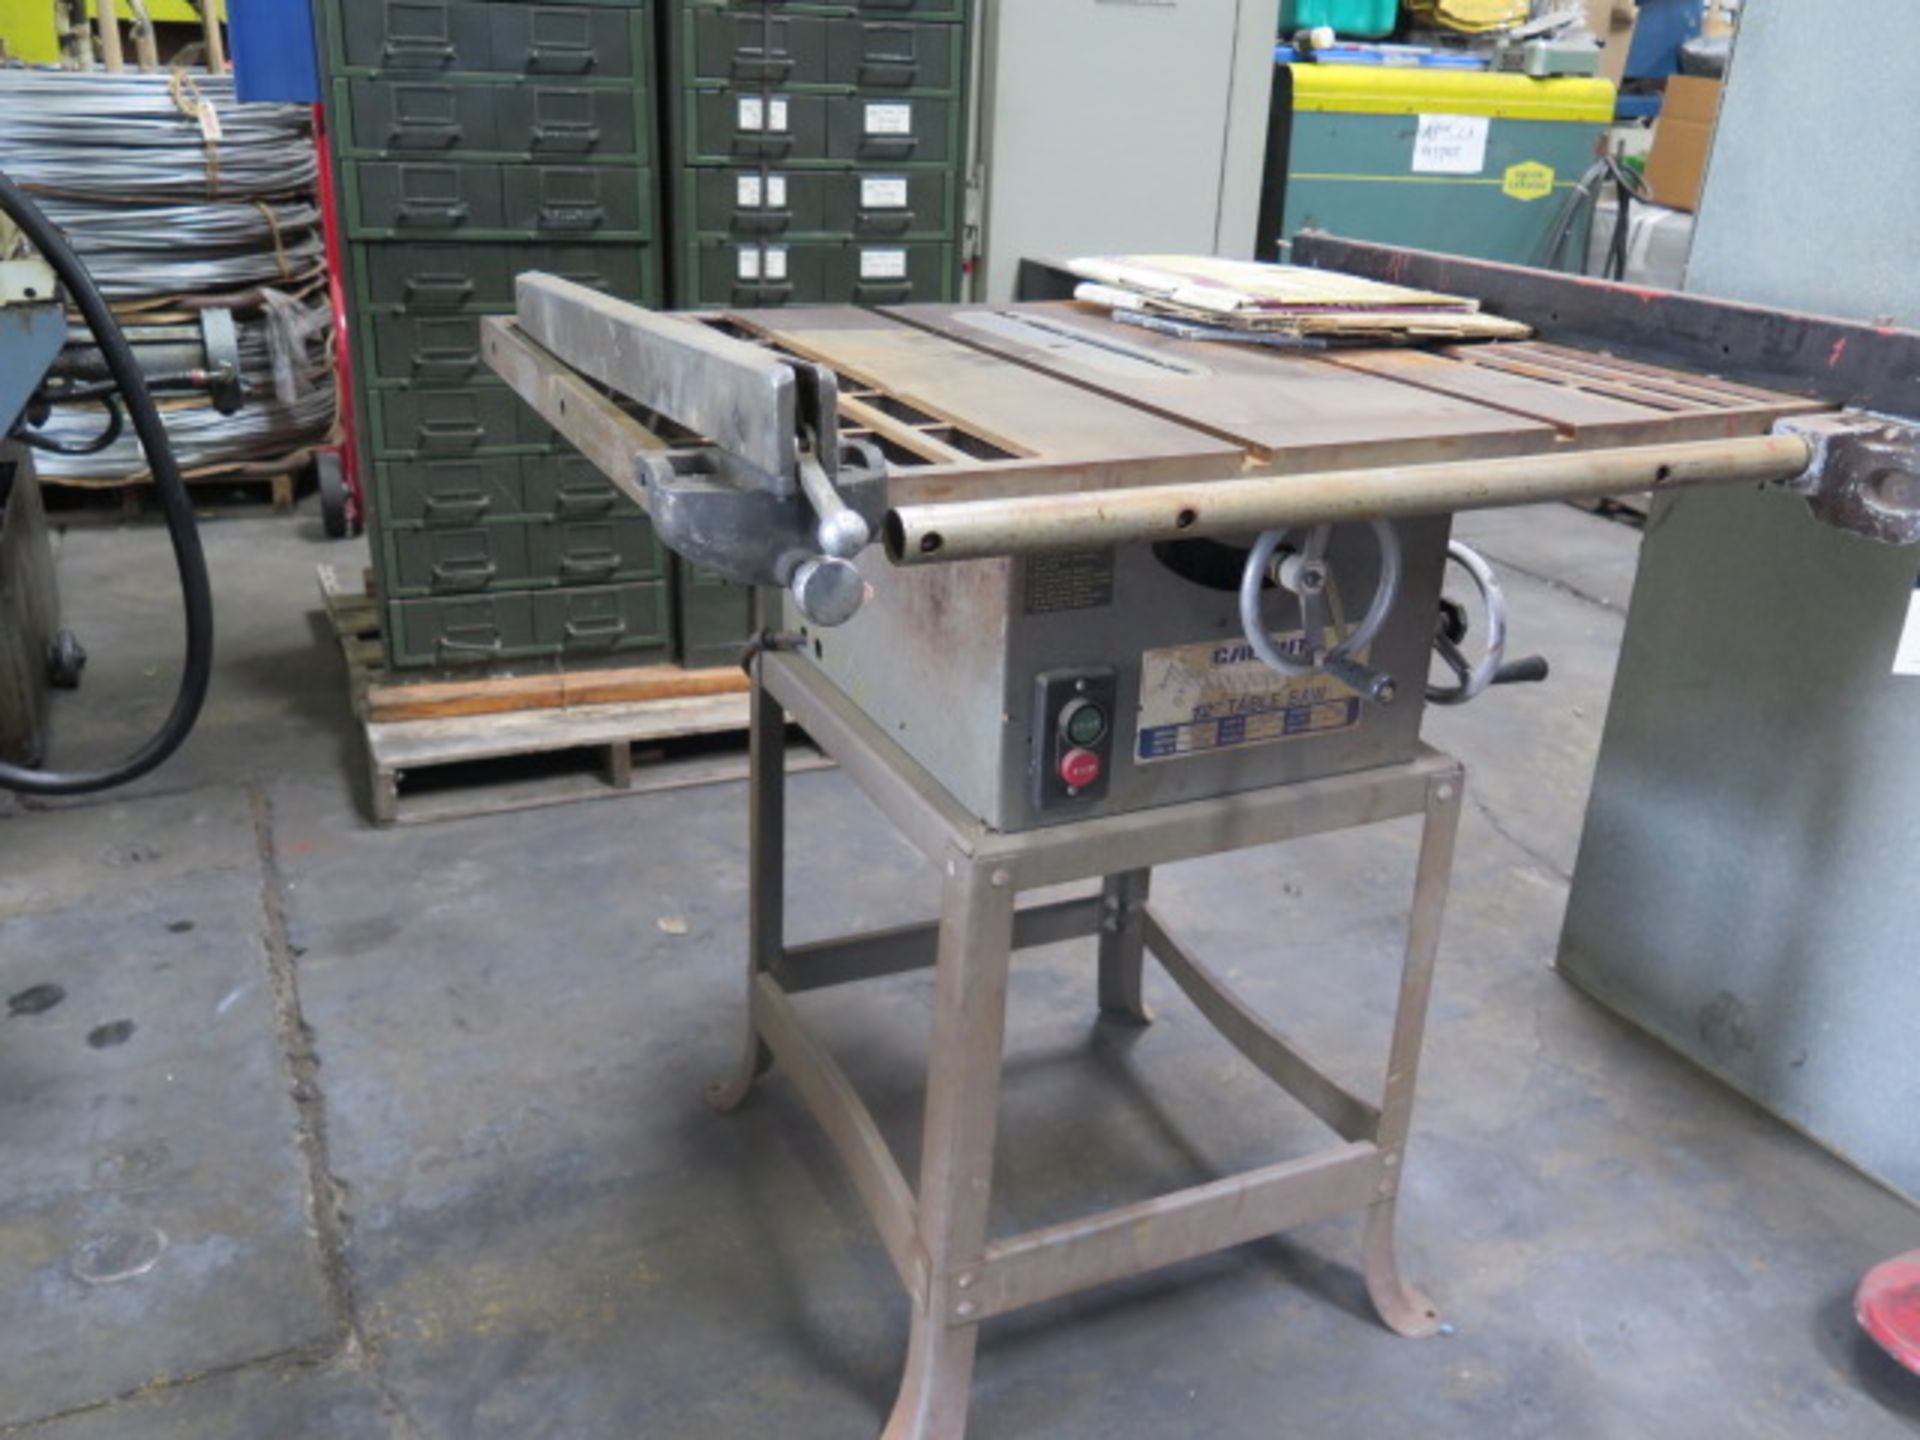 Cal-Cut 12" Table Saw w/ Fence System (SOLD AS-IS - NO WARRANTY) - Image 2 of 7